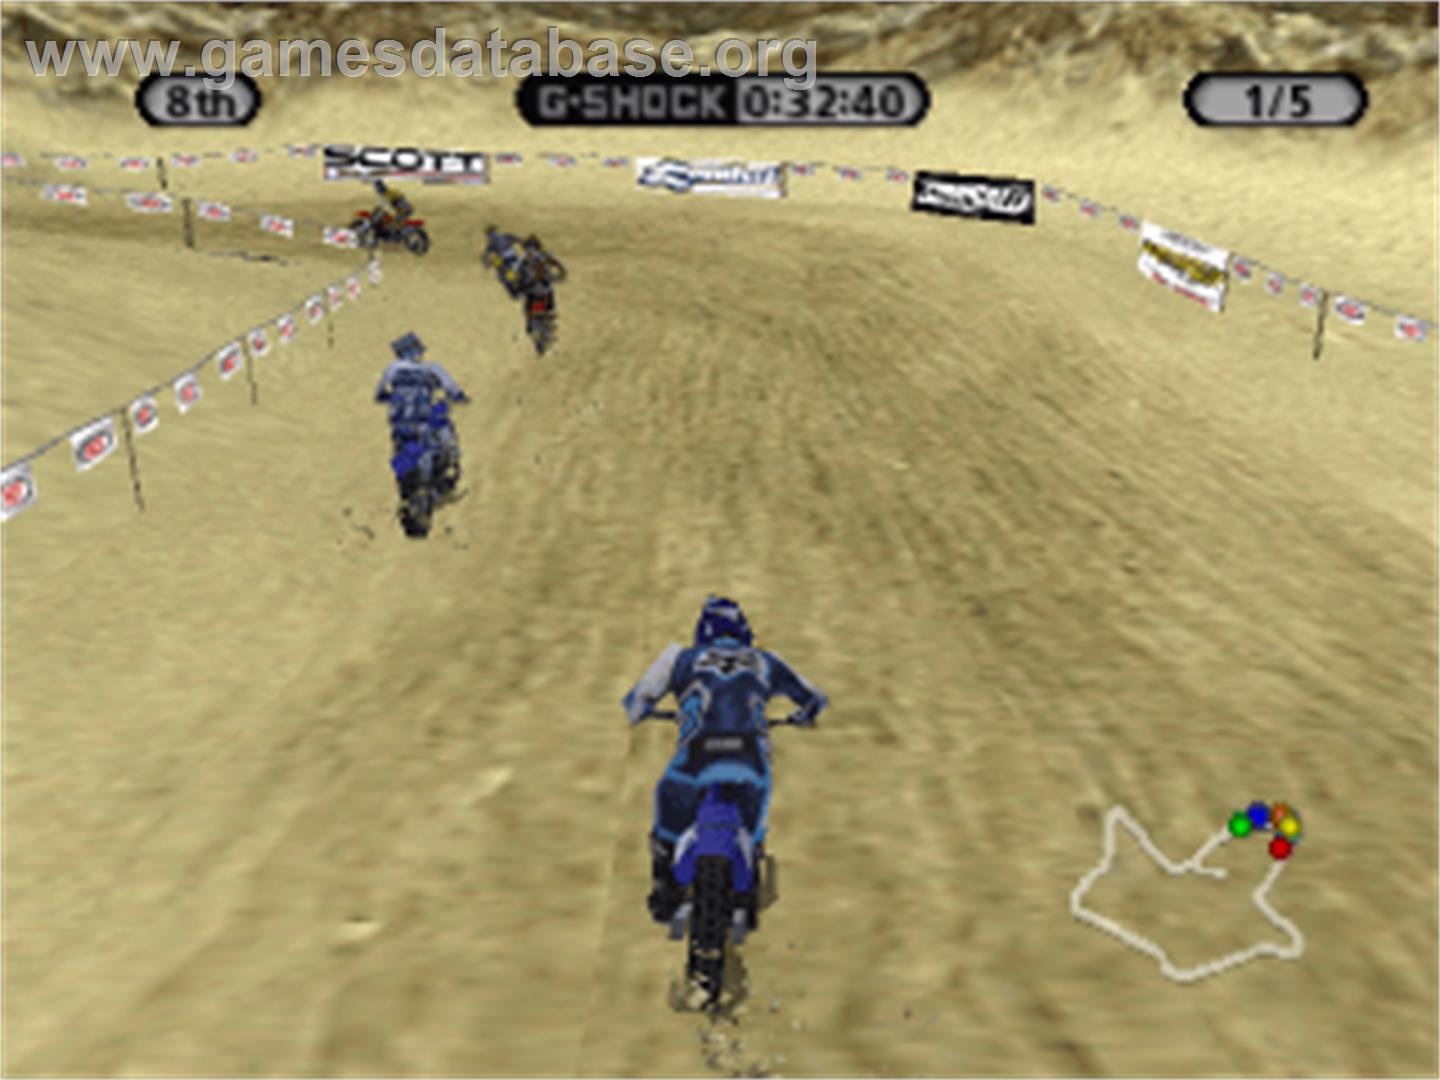 Supercross Circuit - Sony Playstation - Artwork - In Game